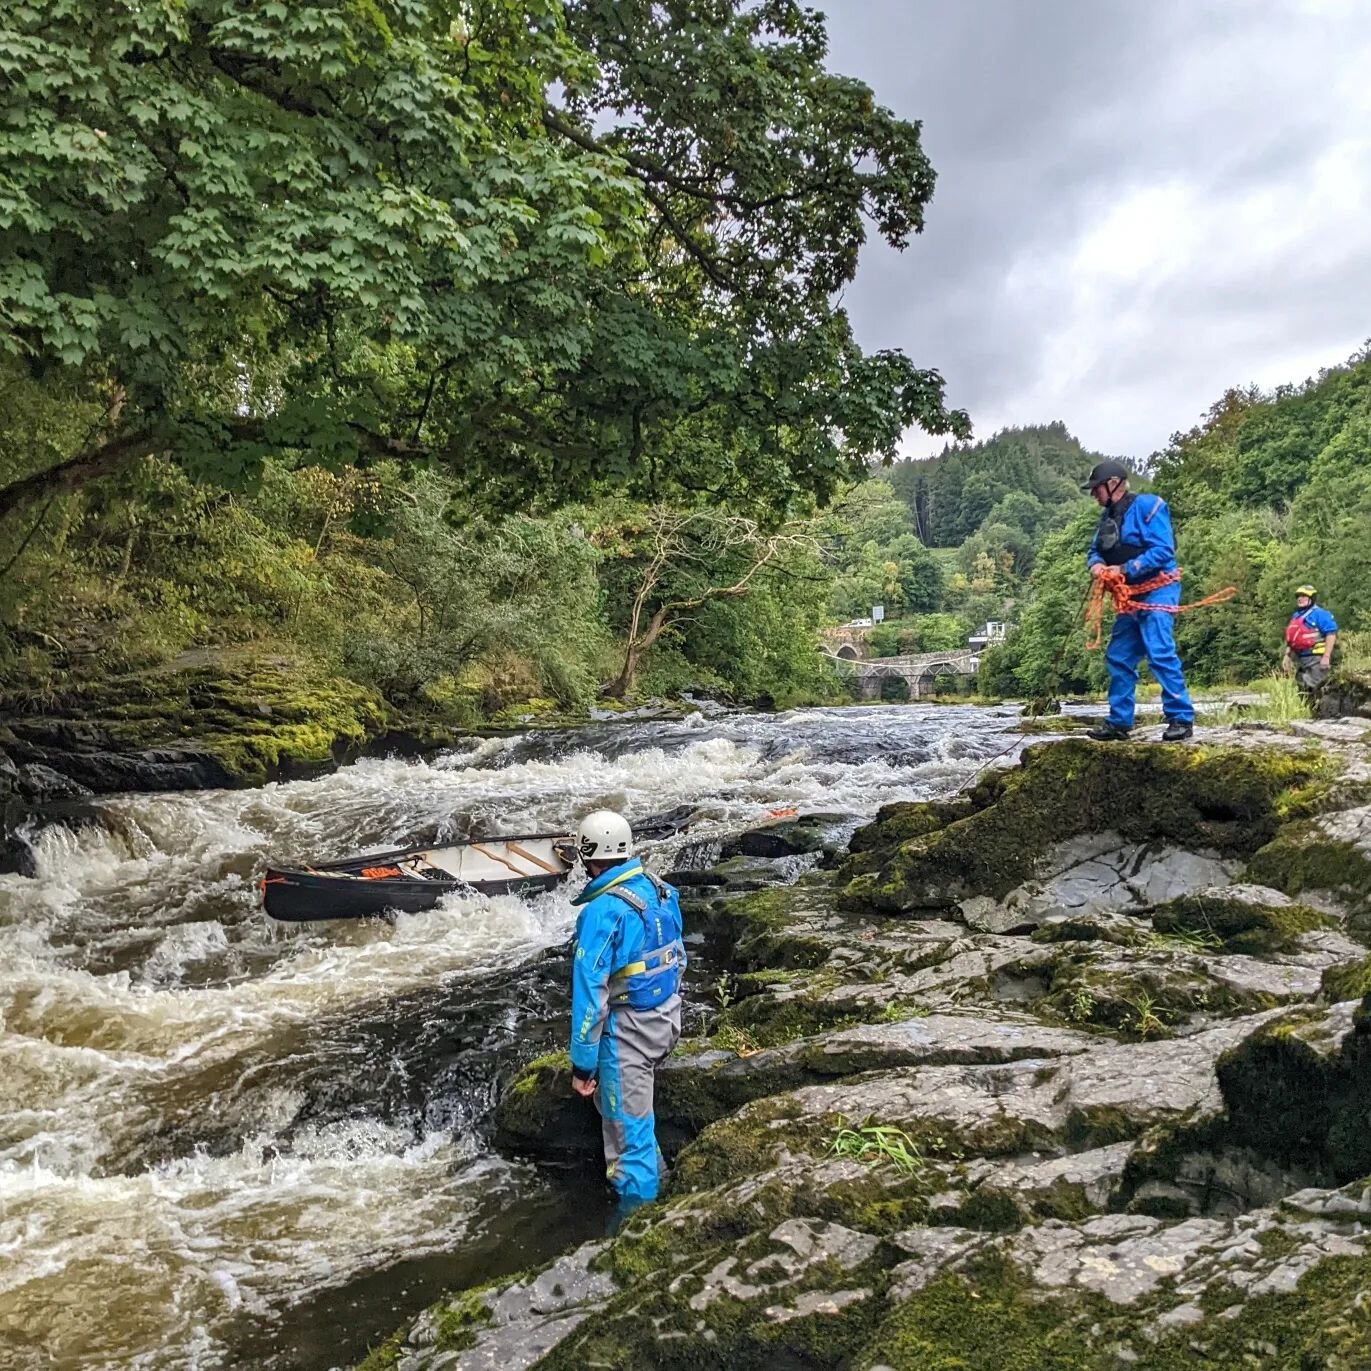 Nice to be back on the Dee for a two day course with Tom, Anthony and Paul from @edgepaddling canoe club. 
With no whitewater paddling over the past two years due to Covid and two of the guys only recently taking up canoeing the team were making move